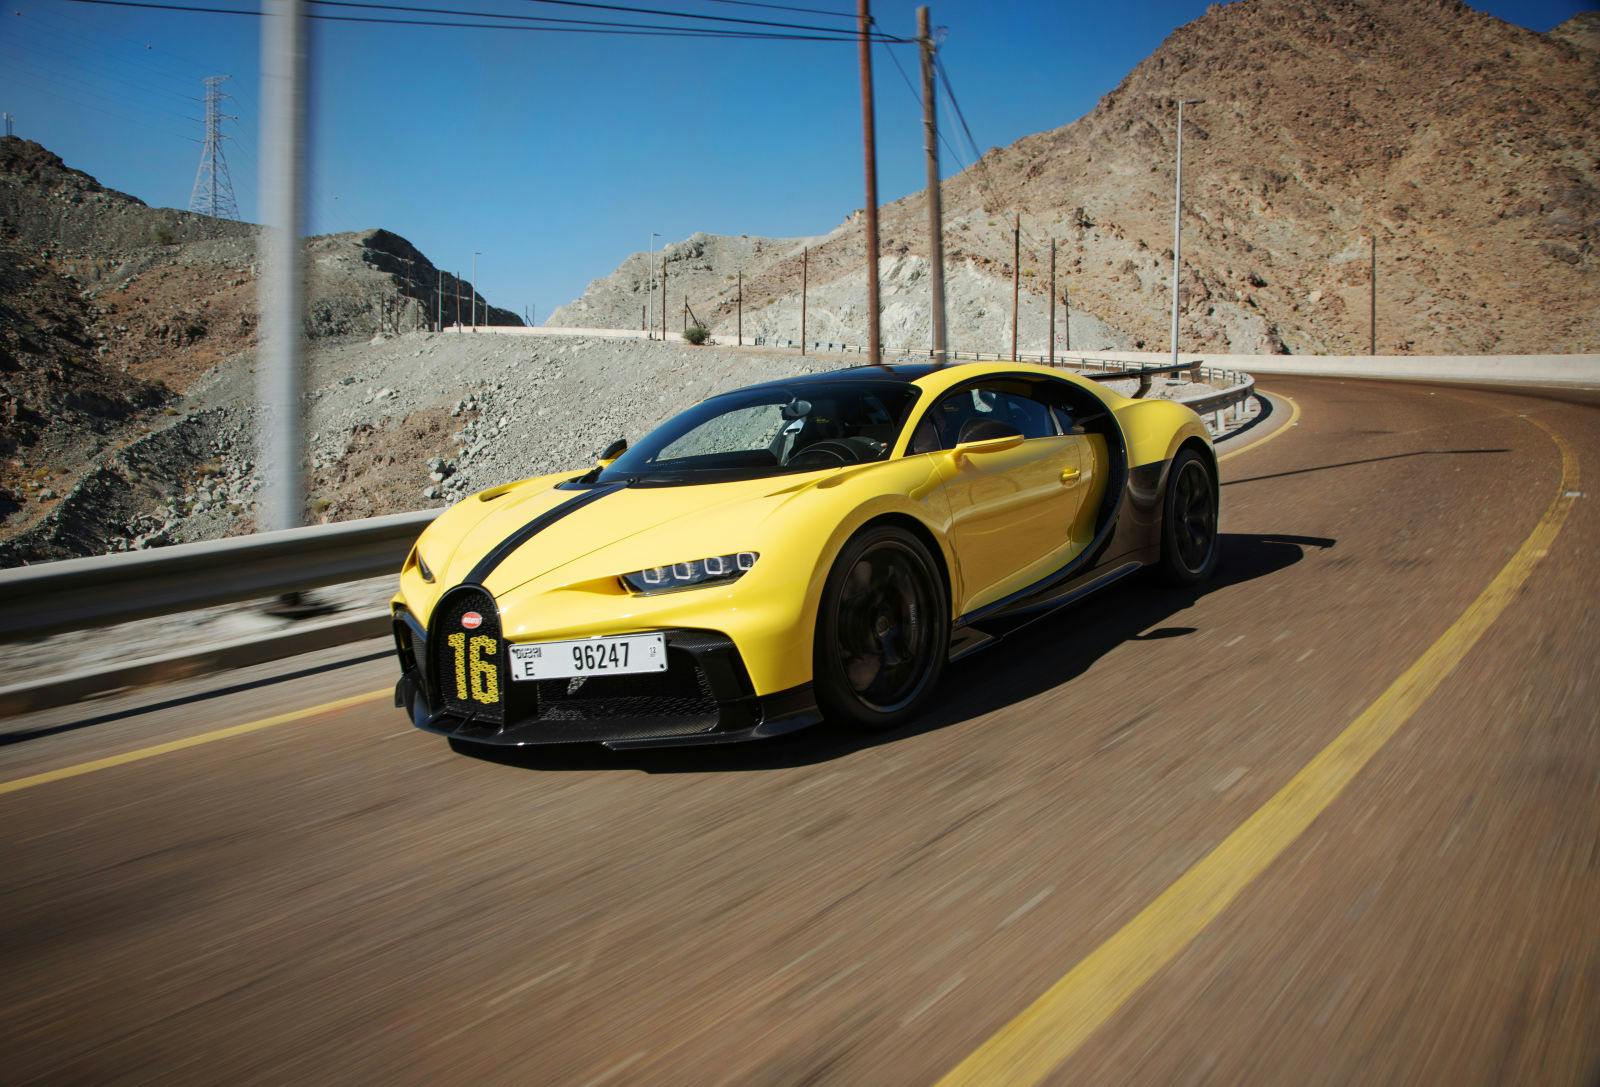 The most agile member of the Chiron family demonstrates its skills on the winding roads around Hatta.